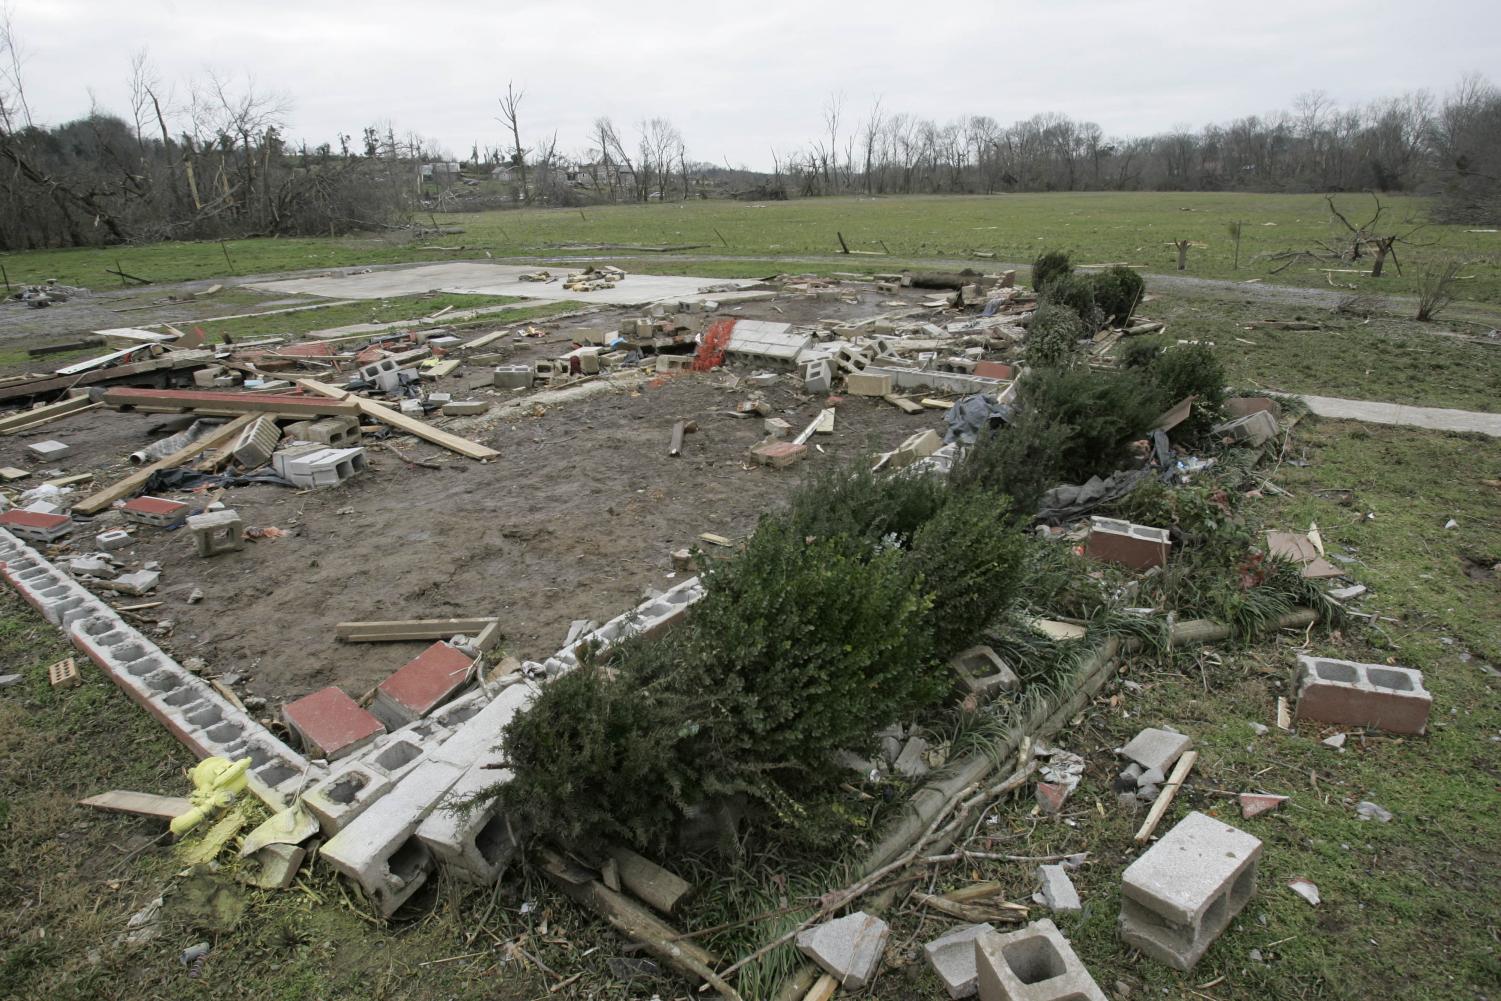 The wreckage of a home is seen next to an open field Thursday, Feb. 7, 2008 in Castalian Springs, Tenn. A baby was found alive in the field, shown in center background, Wednesday after the tornado destroyed the home where the baby was believed to be living.